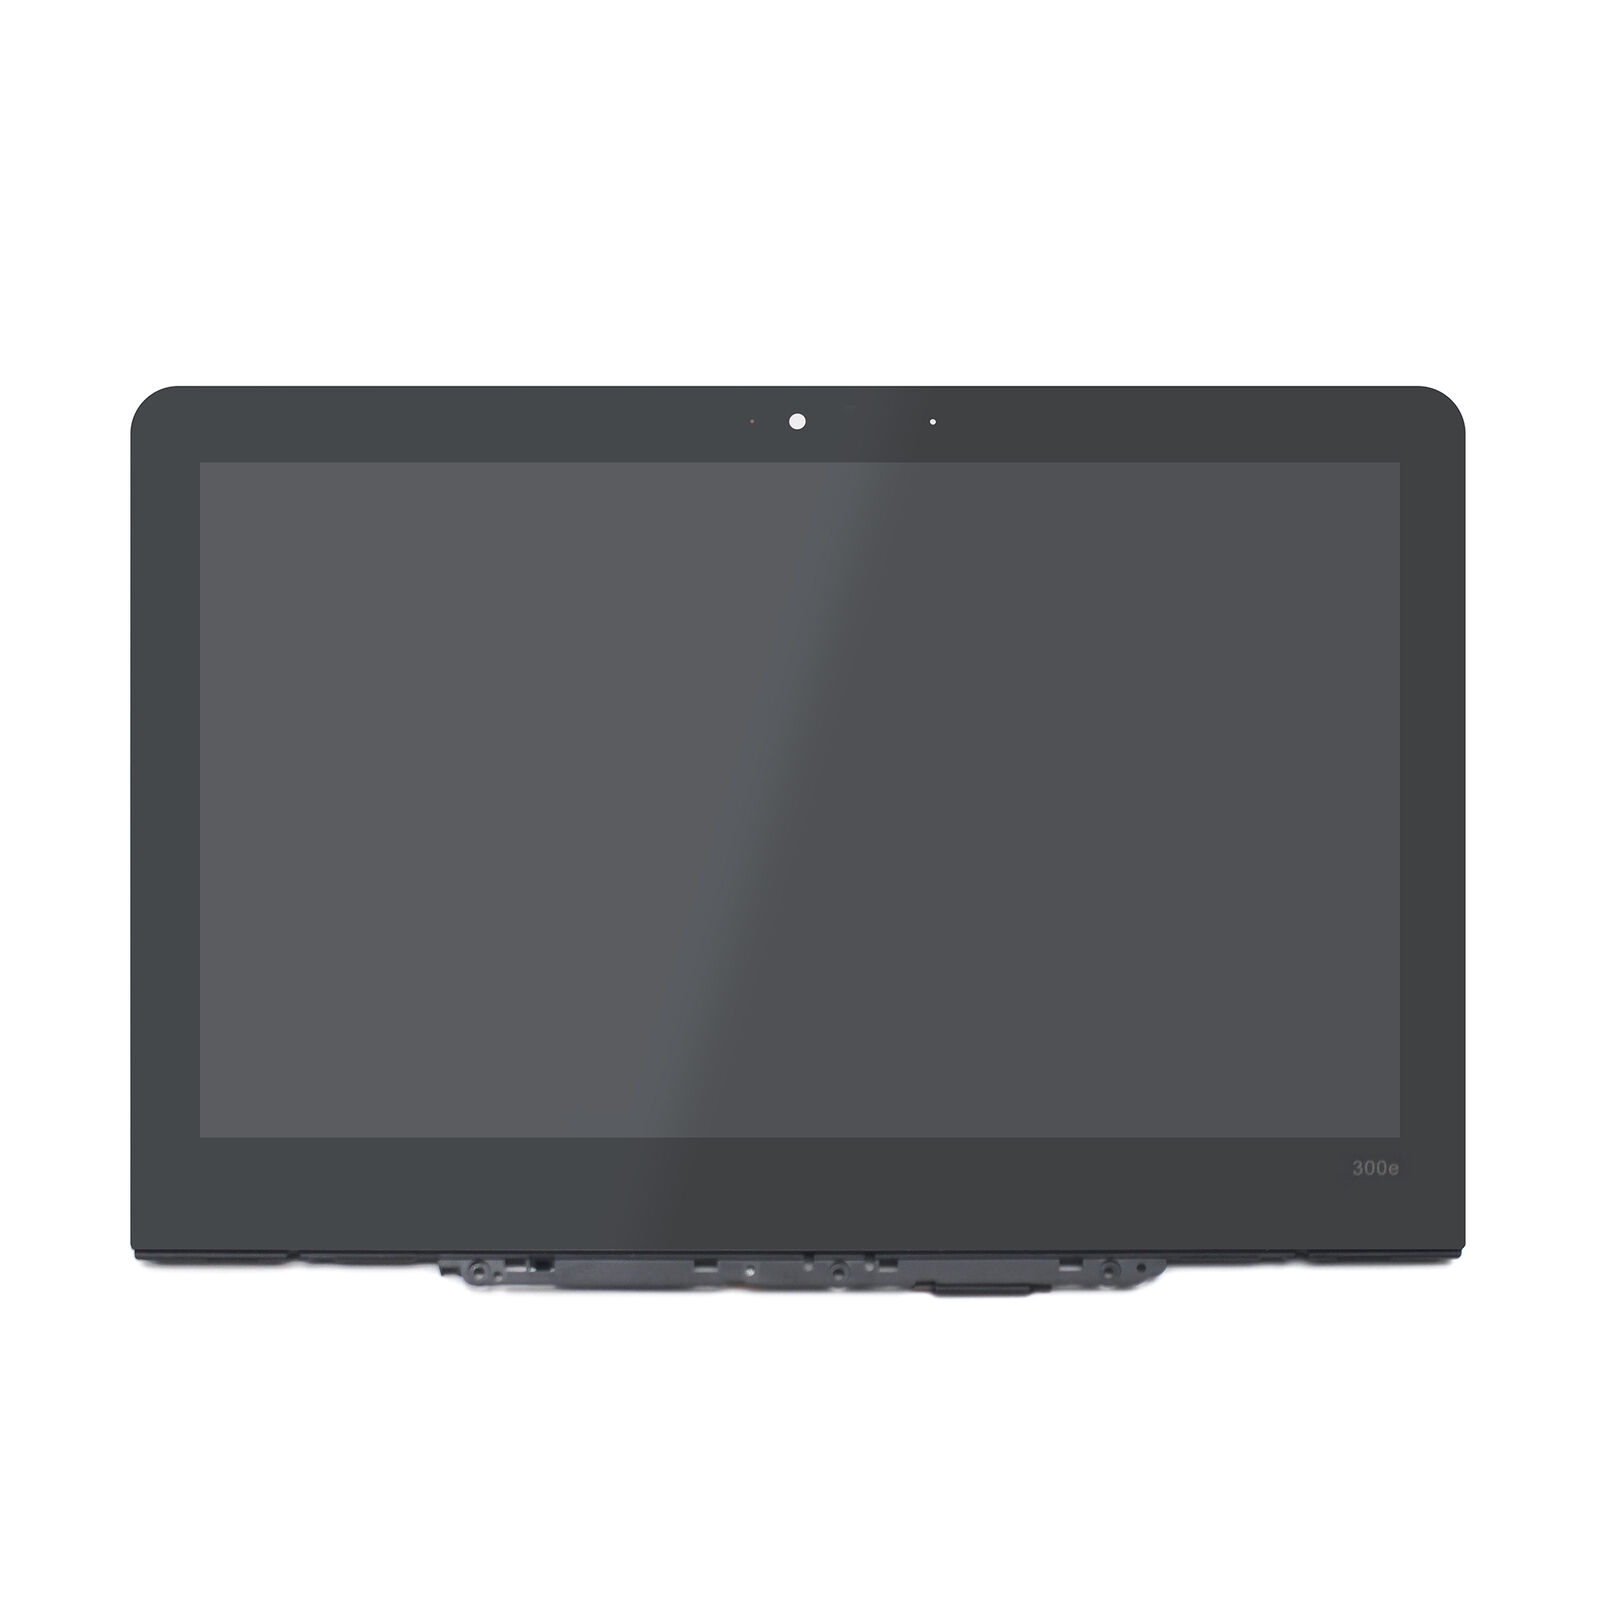 5D10R13451 LCD Touch Screen Digitizer Assembly for Lenovo Chromebook 300e 81H0